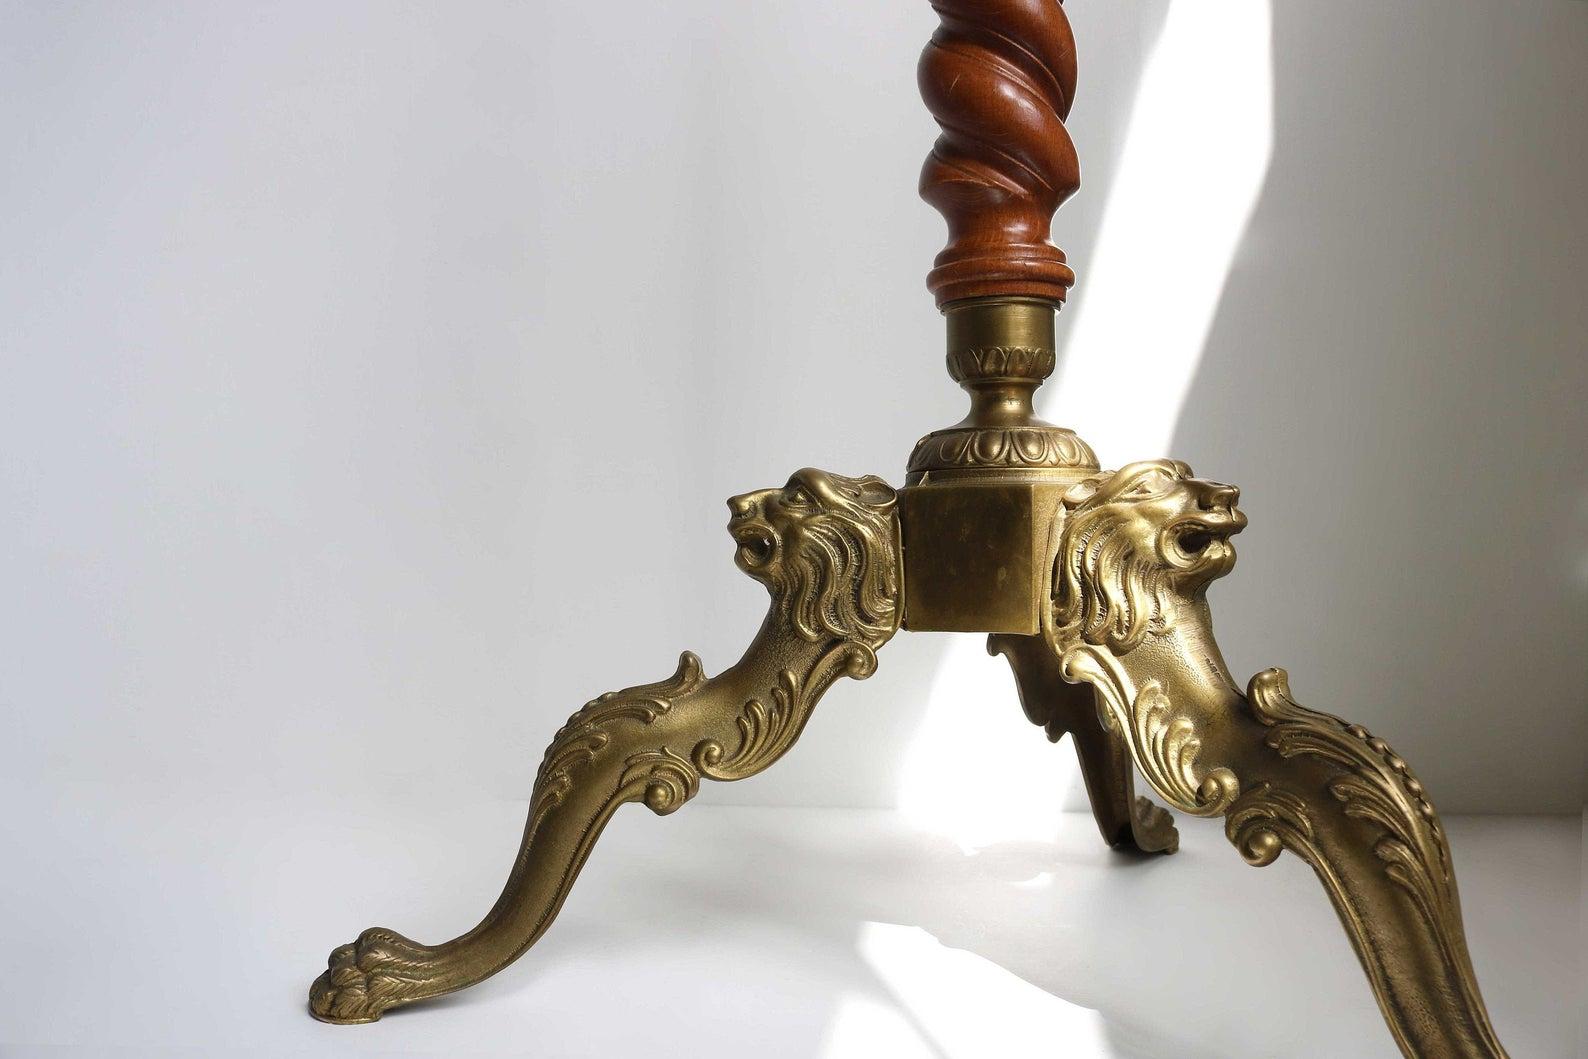 This high quality, ornate hall tree dates to the 1940's.
A stunning and very well made ornate brass and wood coat stand.
With turnable crown and casted brass hooks, and three lightly curved legs are embellished with lions heads and end in the